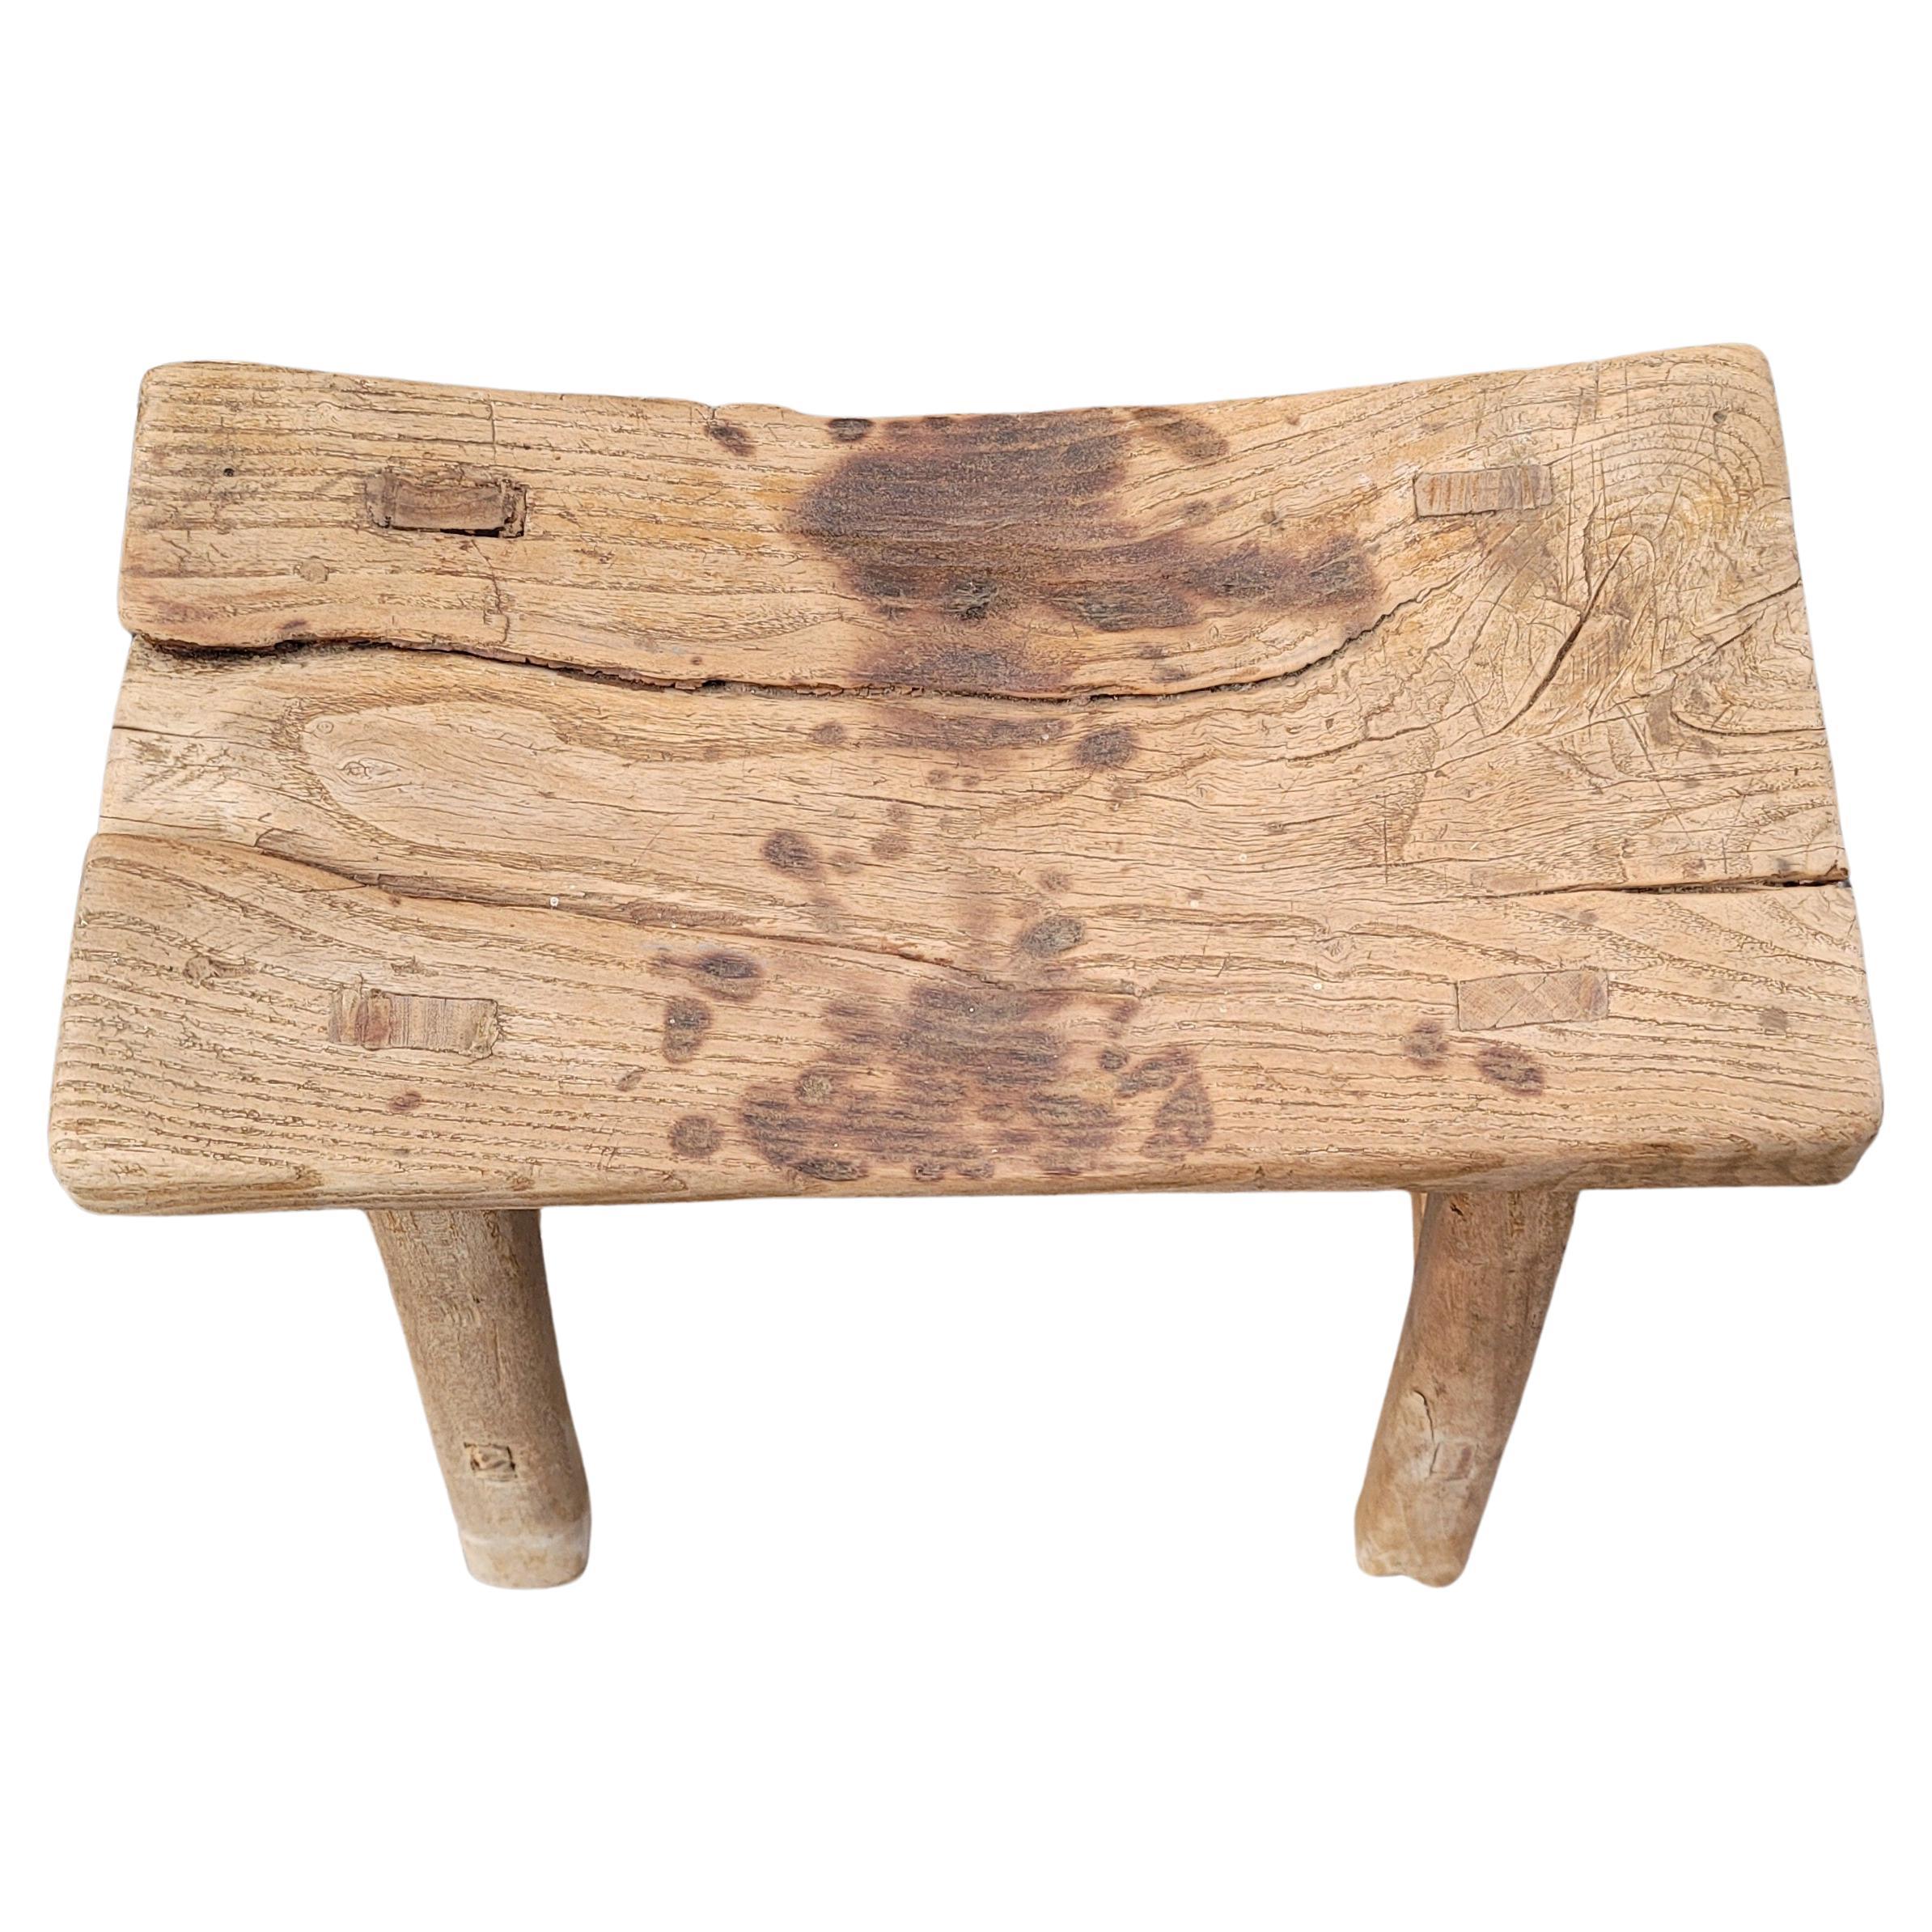 Hand-Crafted 19th Century Chinese Elm Rustic Primitive Brutalist Stool For Sale